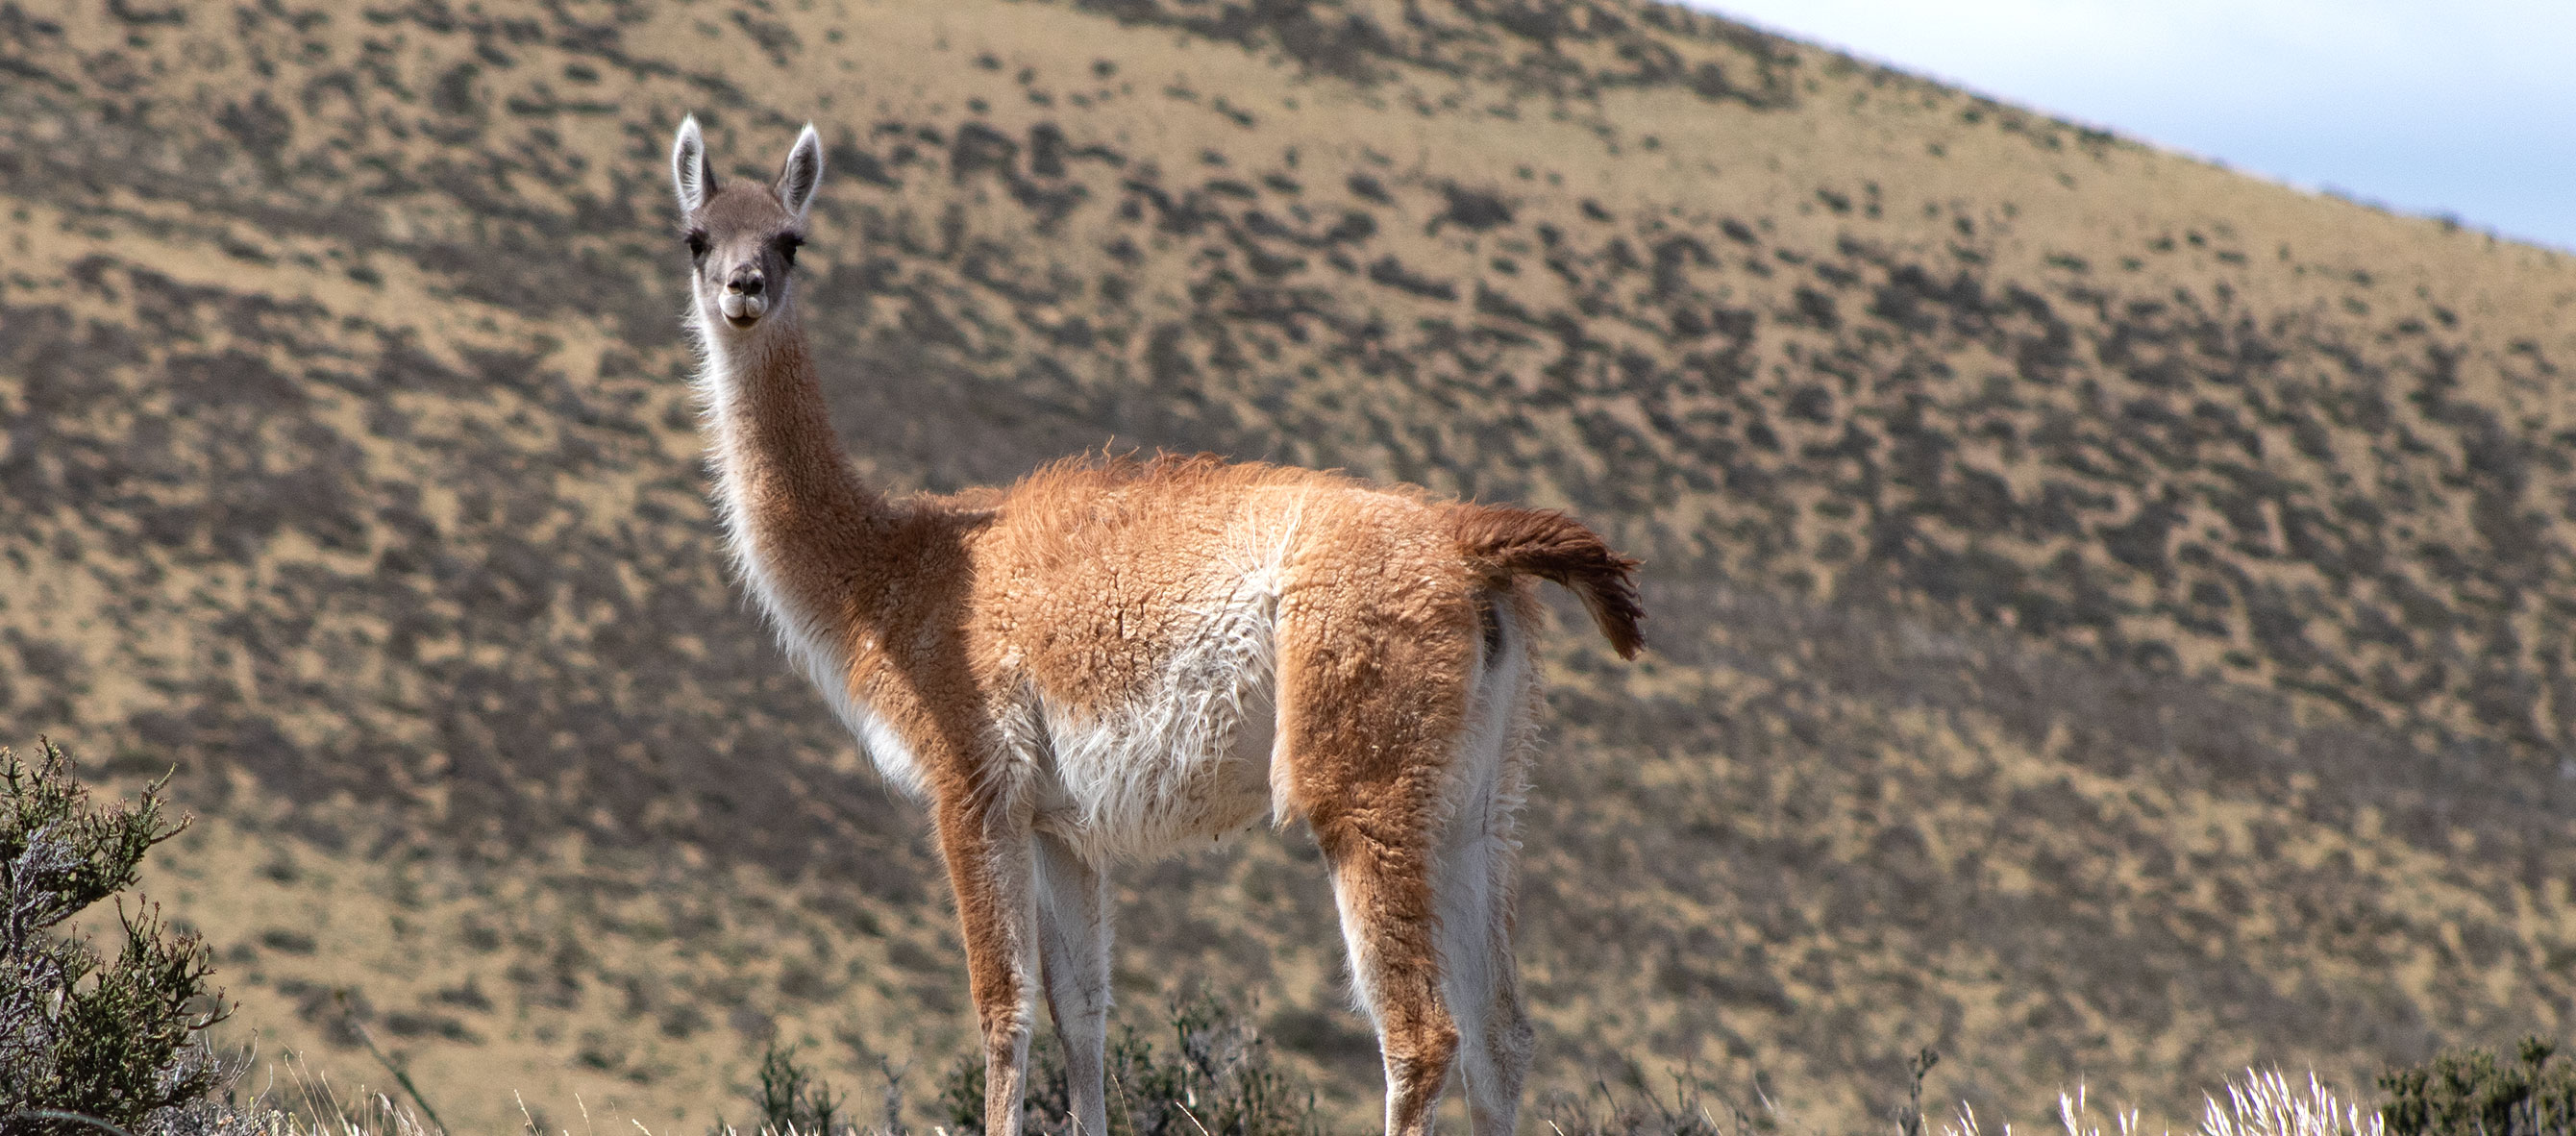 A vicuna on a hill looking at the camera